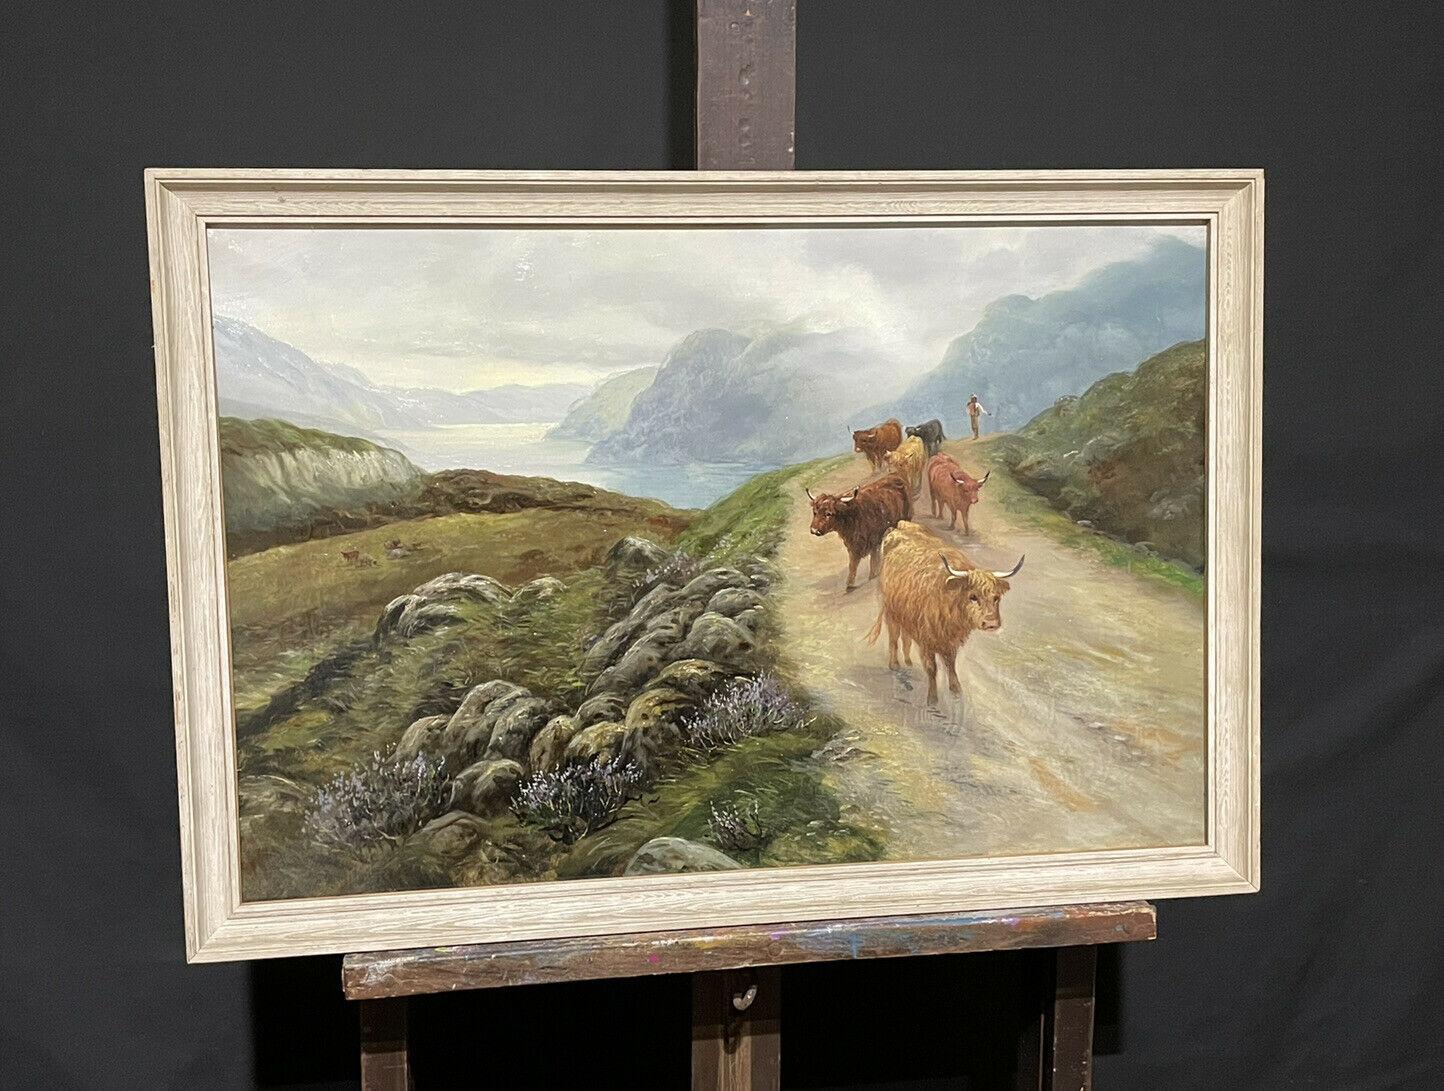 ANTIQUE SCOTTISH OIL PAINTING - CATTLE WALKING THE MOUNTAIN PATH - LOCH LONG - Painting by Scottish School